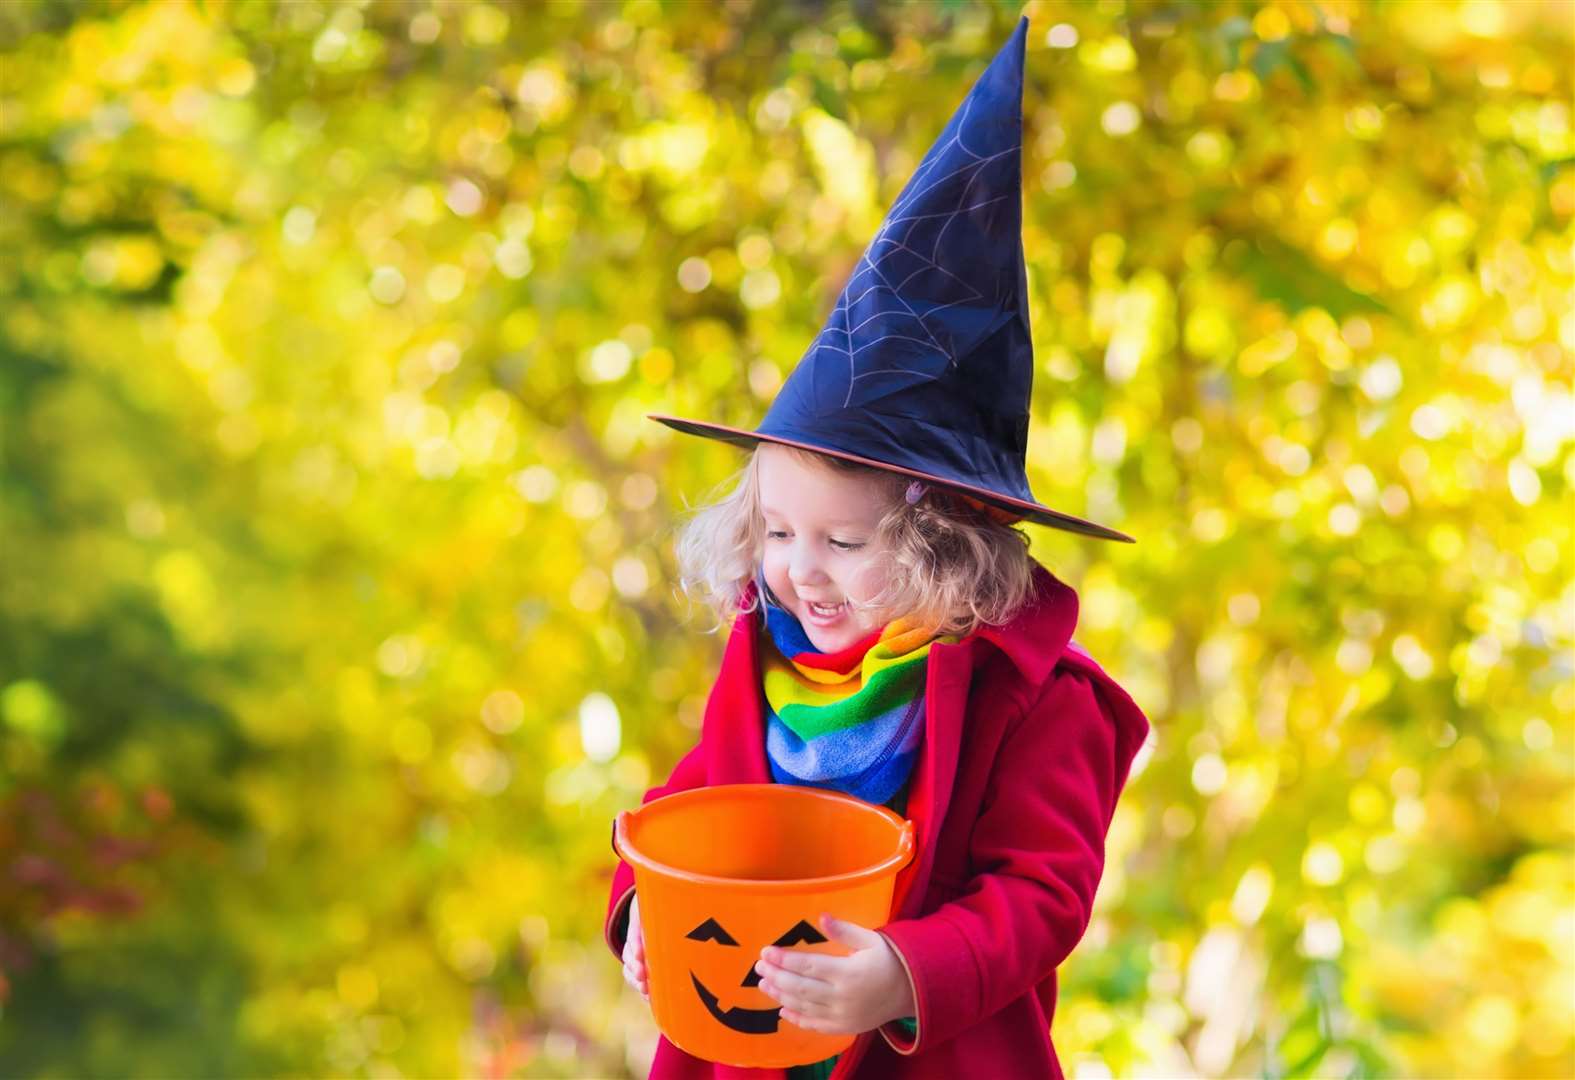 Things to do this weekend in Kent including Halloween events